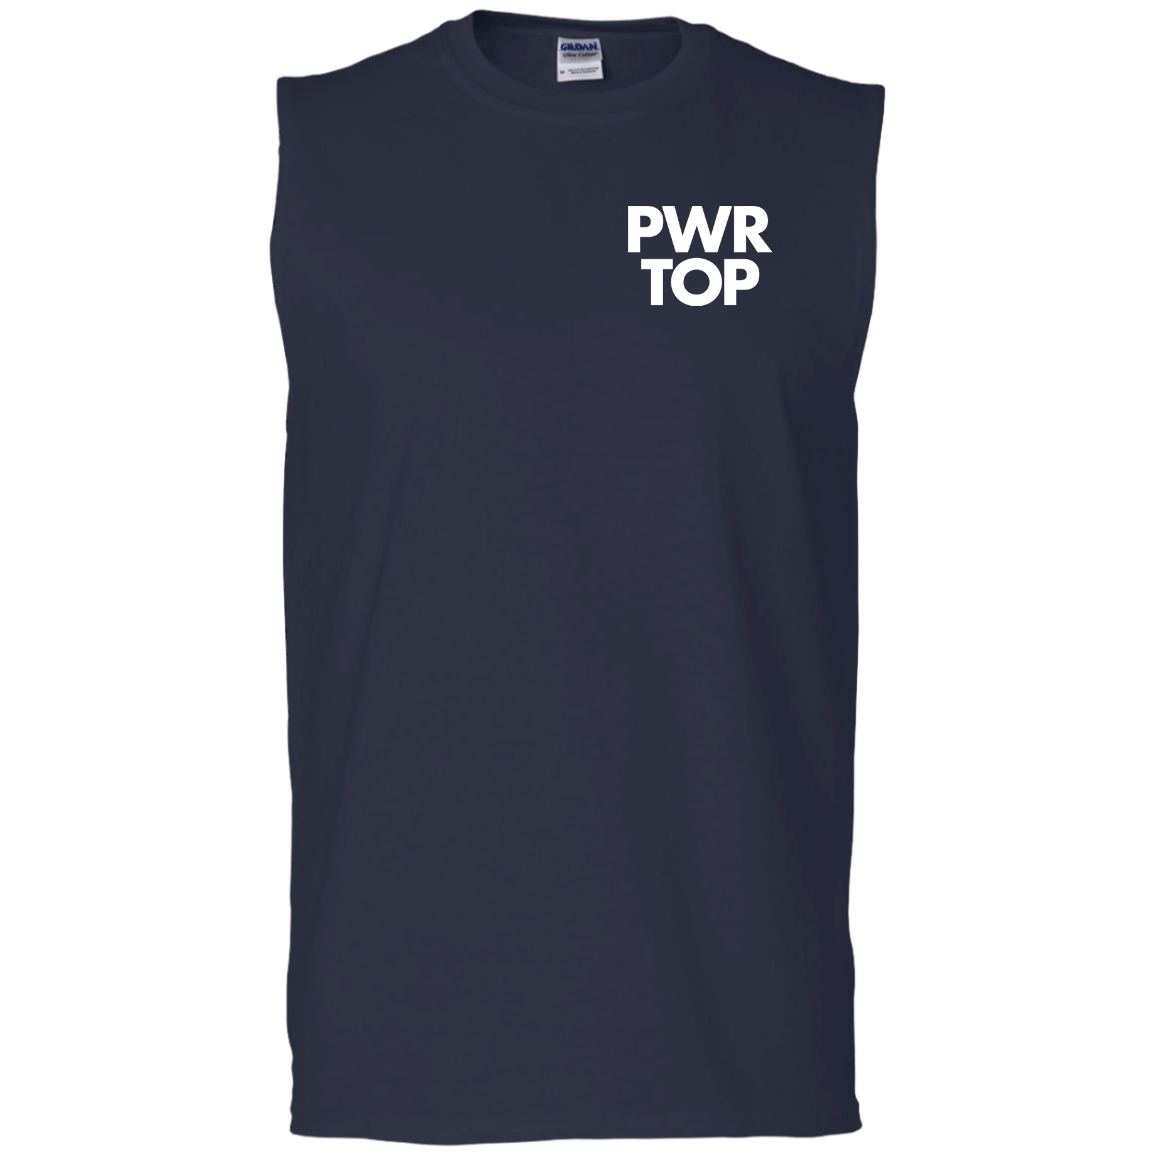 PWR TOP